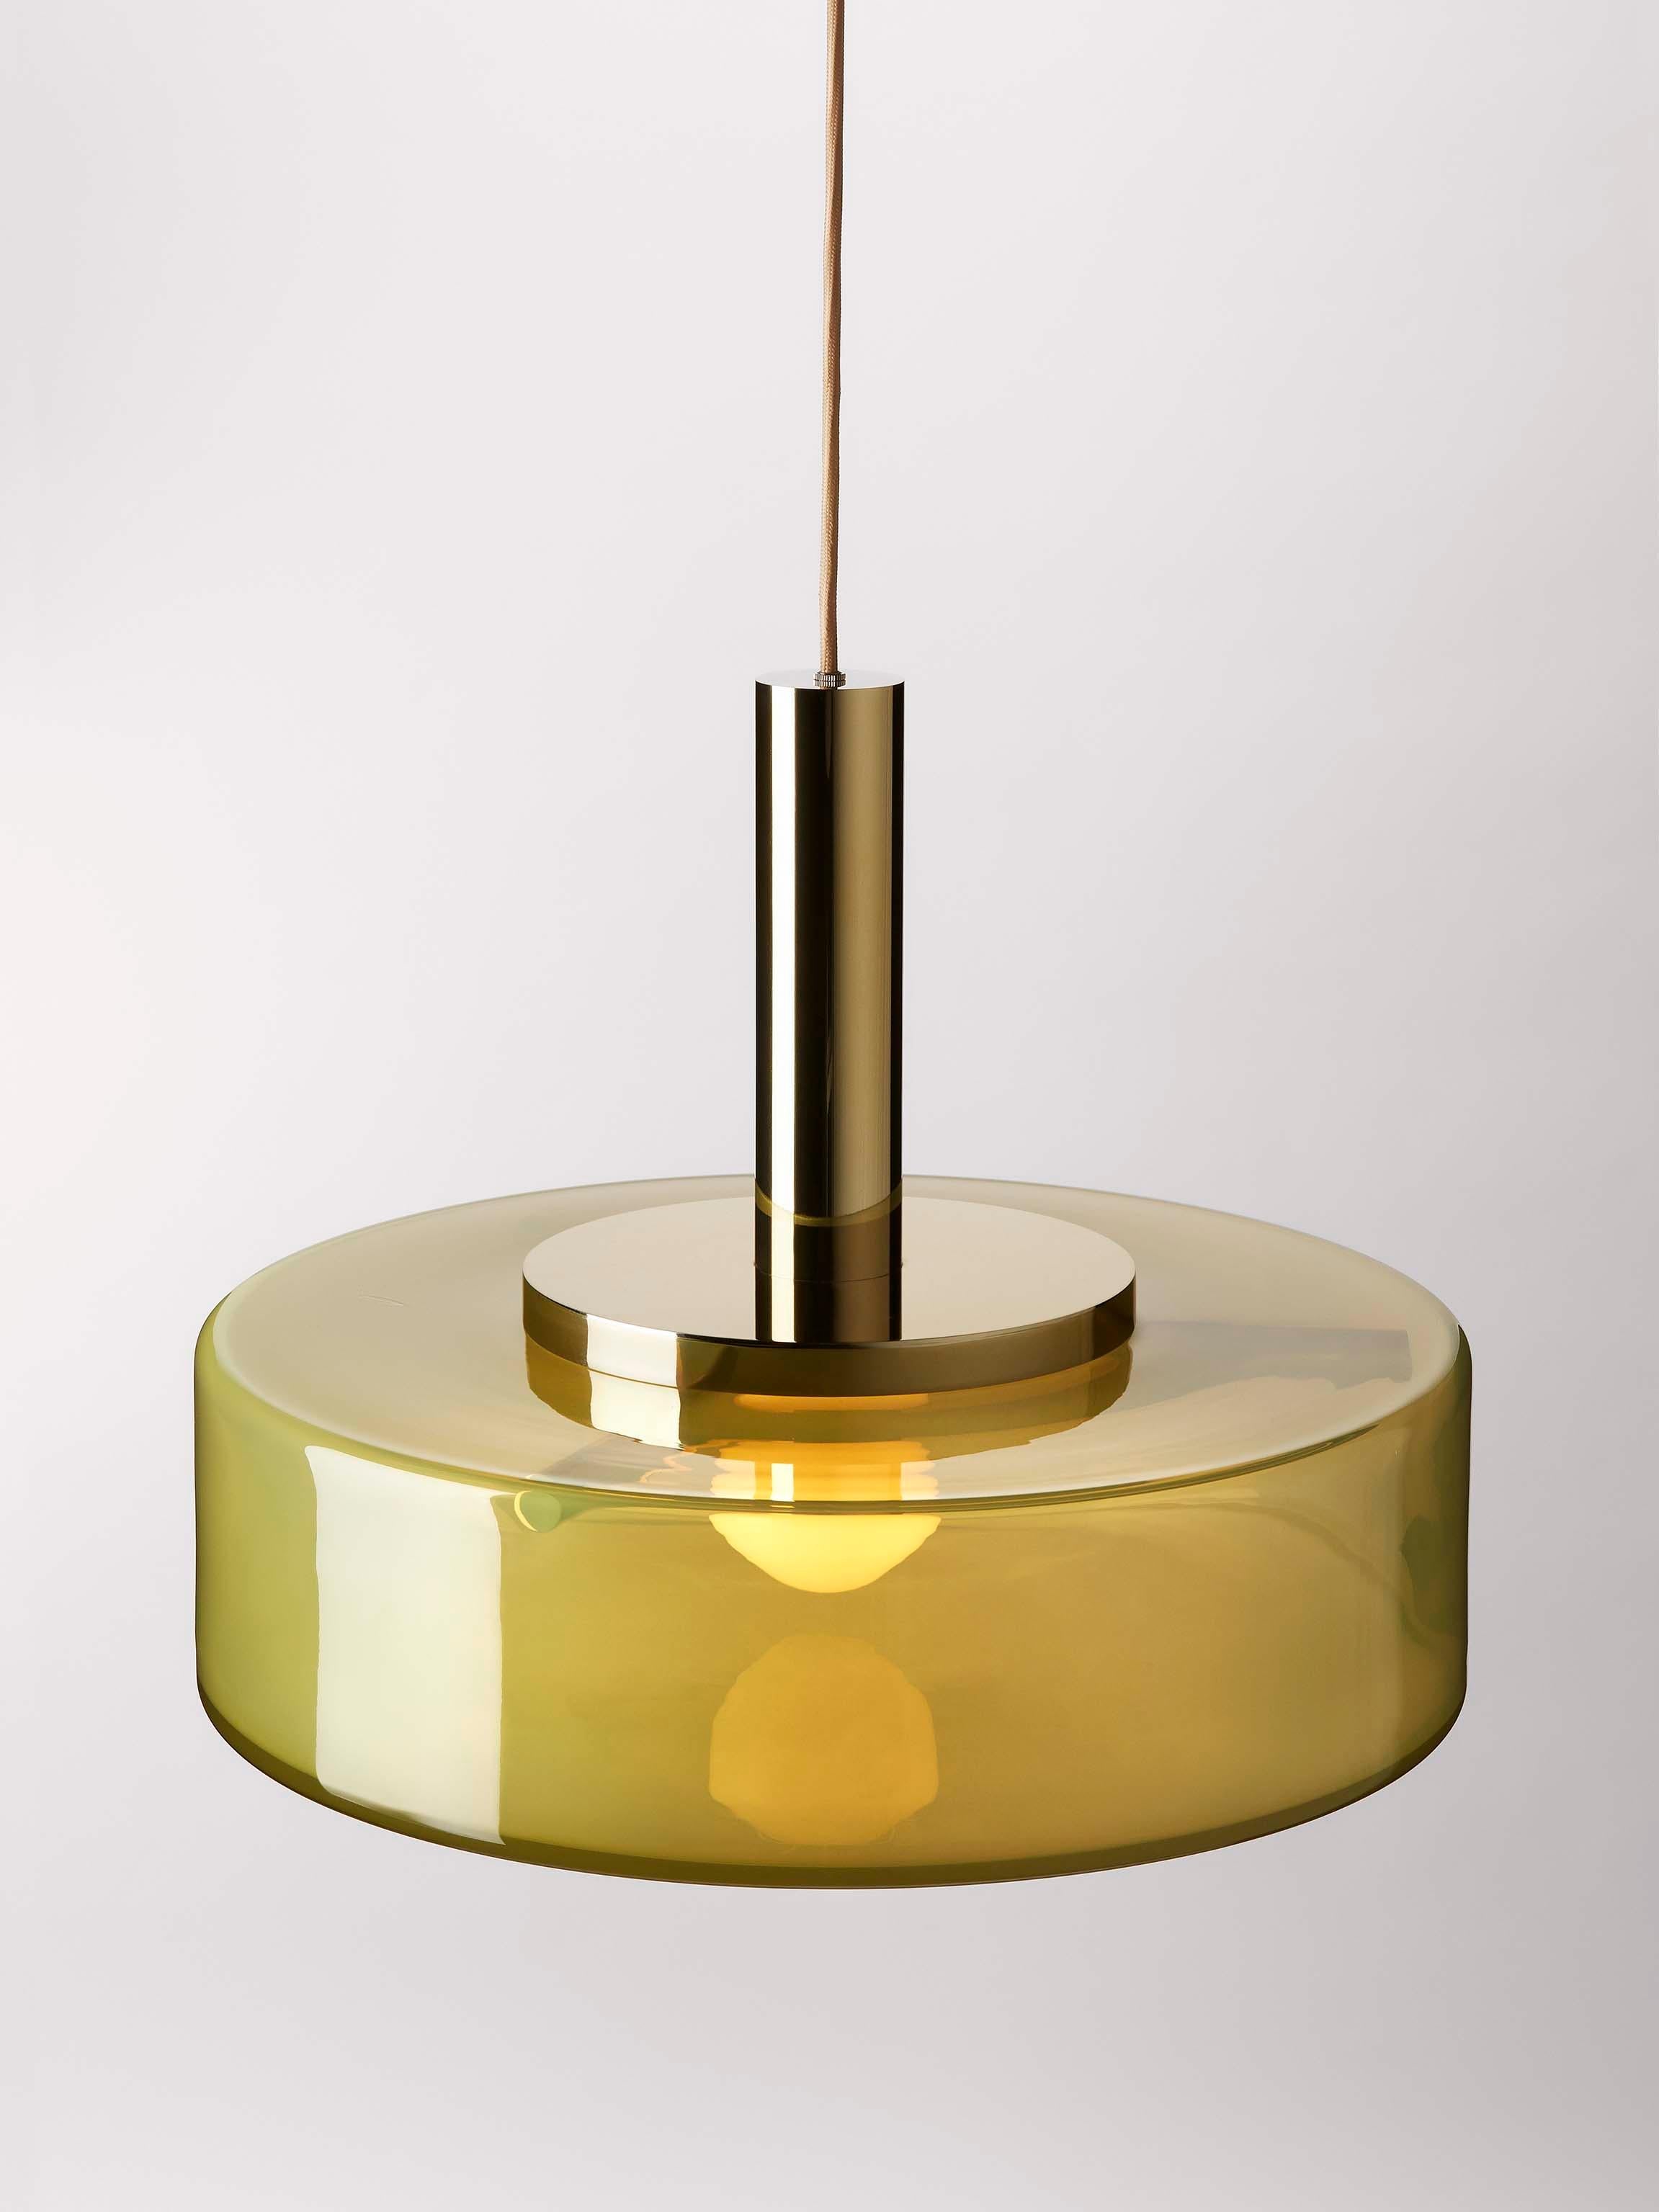 Set of 2 green pendant Light by Dechem Studio
Dimensions: D 56 x H 180 cm
Materials: brass, glass.
Also available: different colours and sizes available

Named after the series of successful Czechoslovak science satellites that orbited the